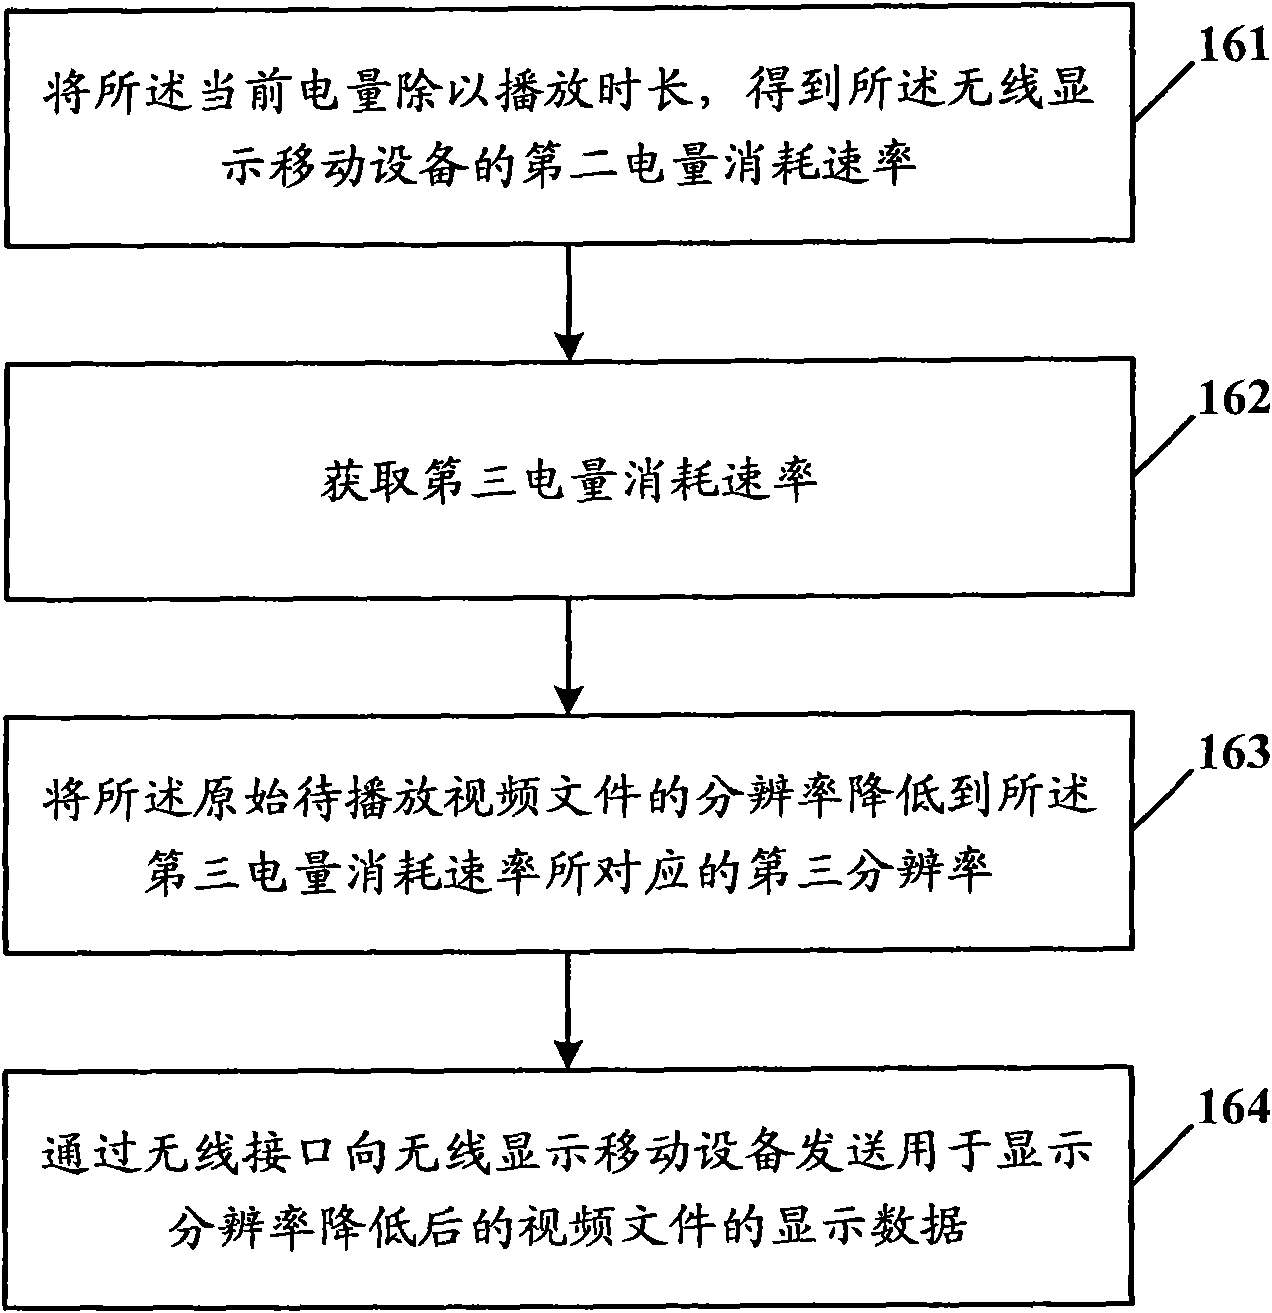 Processing method for playing video files, device and display equipment